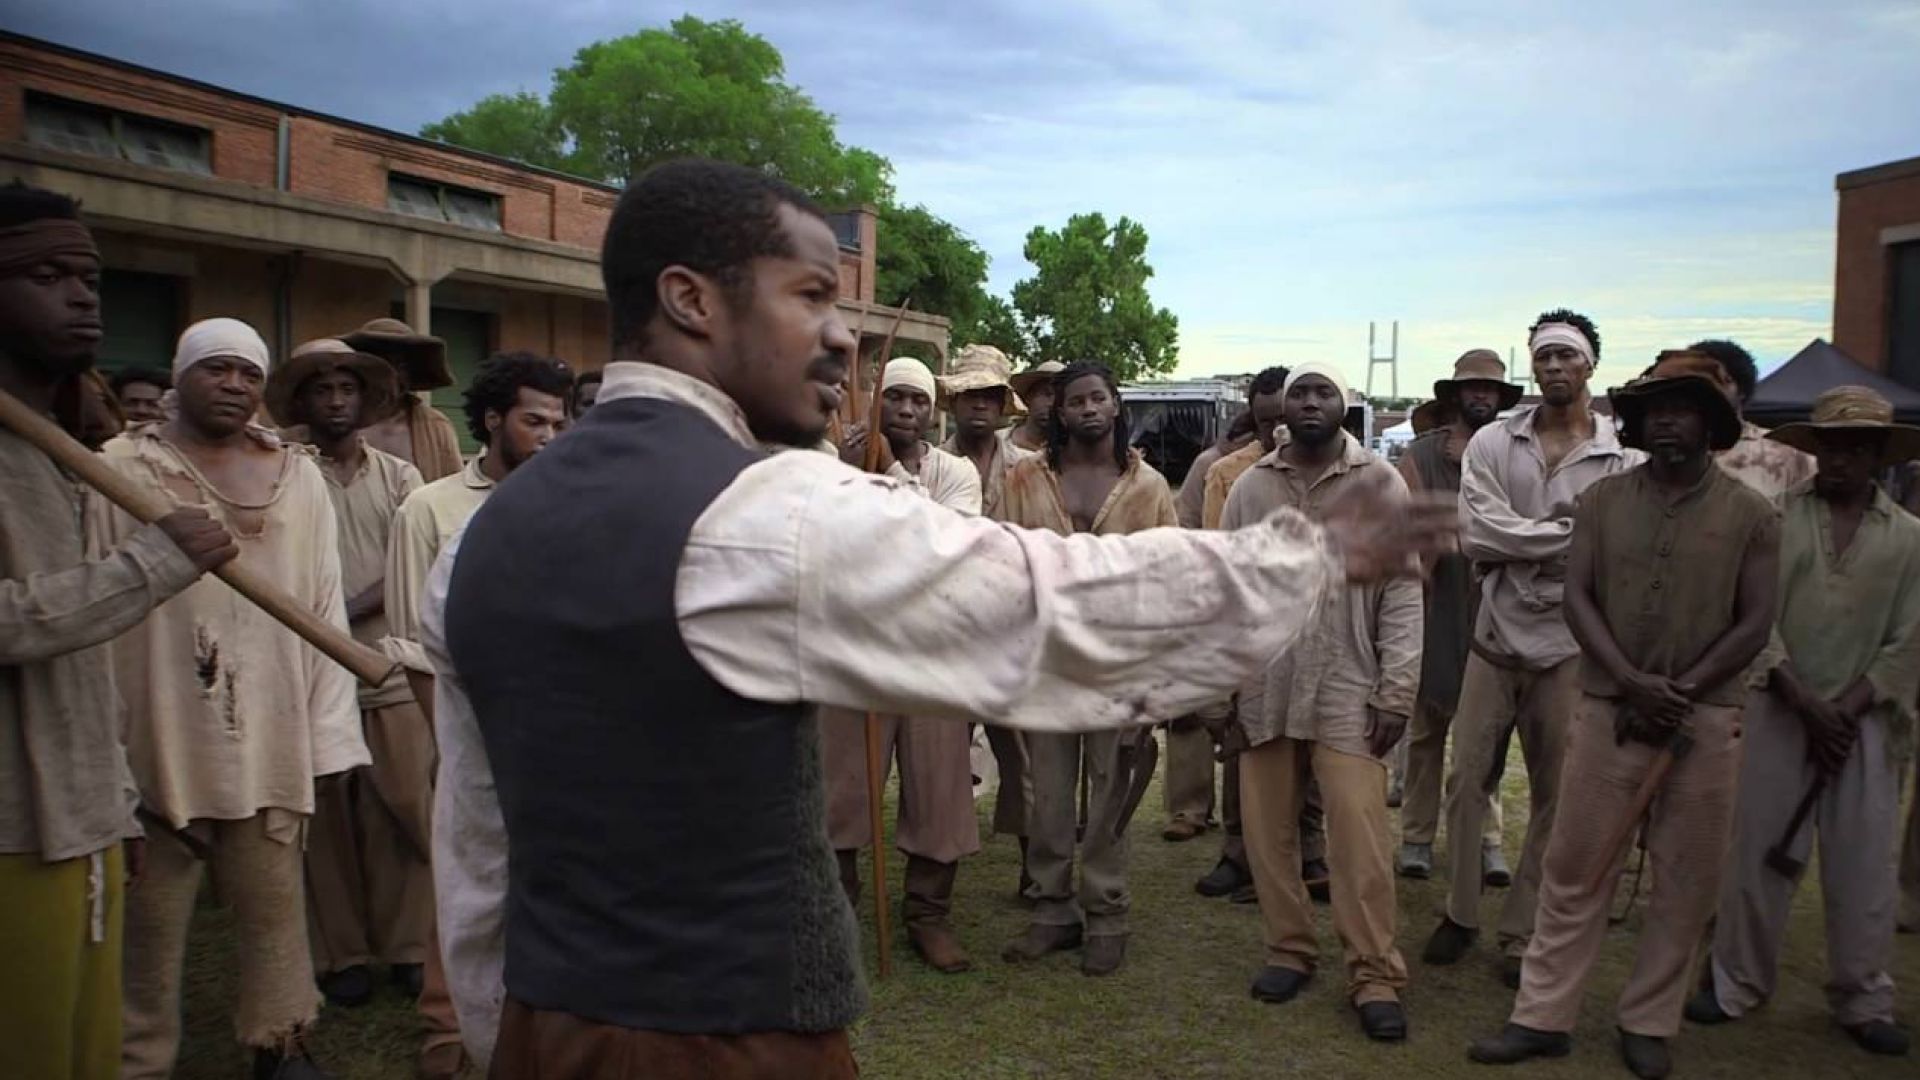 Watch: behind the scenes video on &#039;The Birth of a Nation&#039;